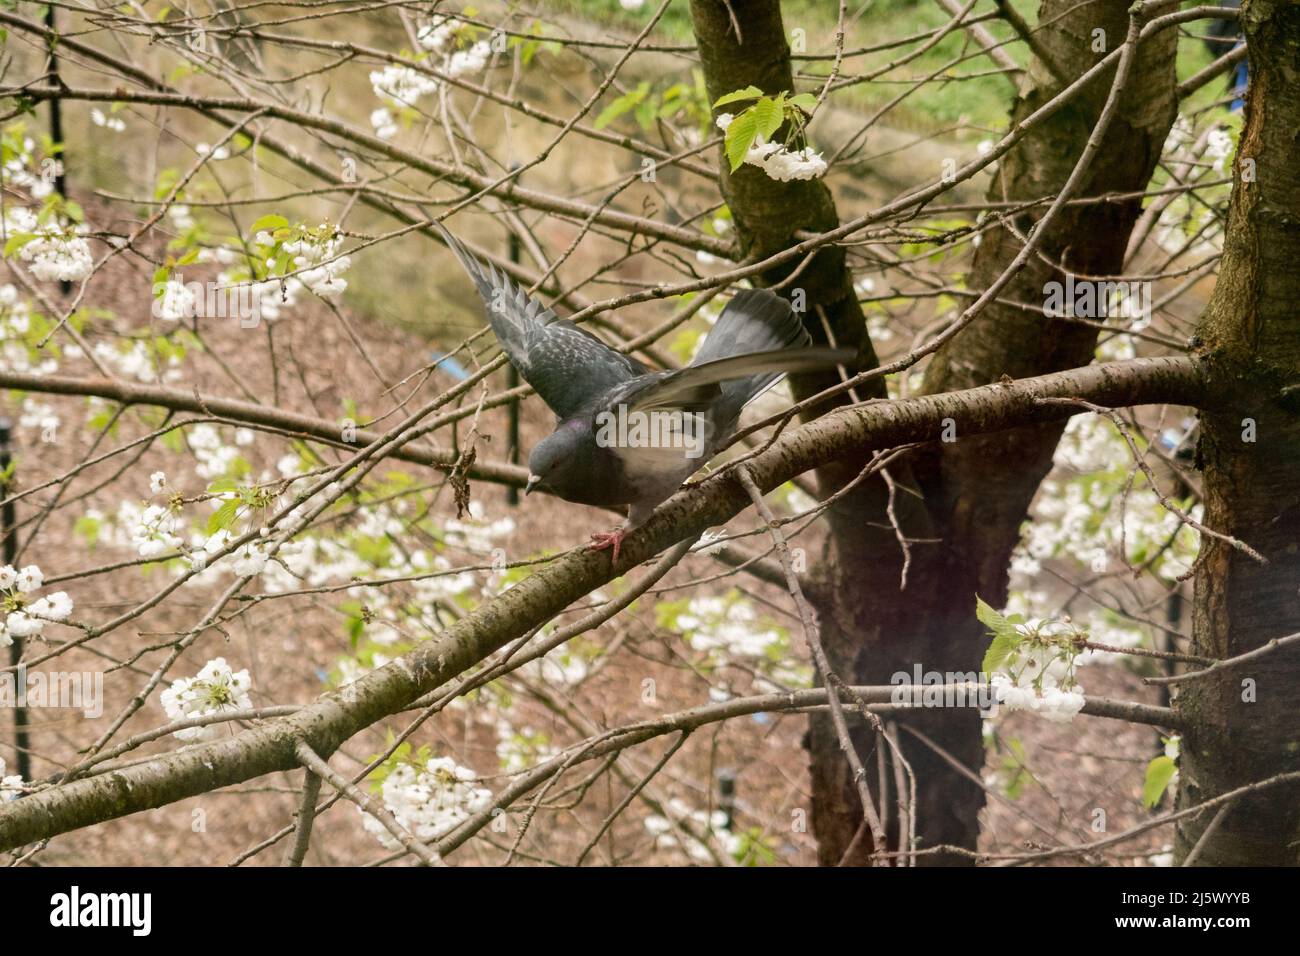 A pigeon walking on a branch of a tree Stock Photo